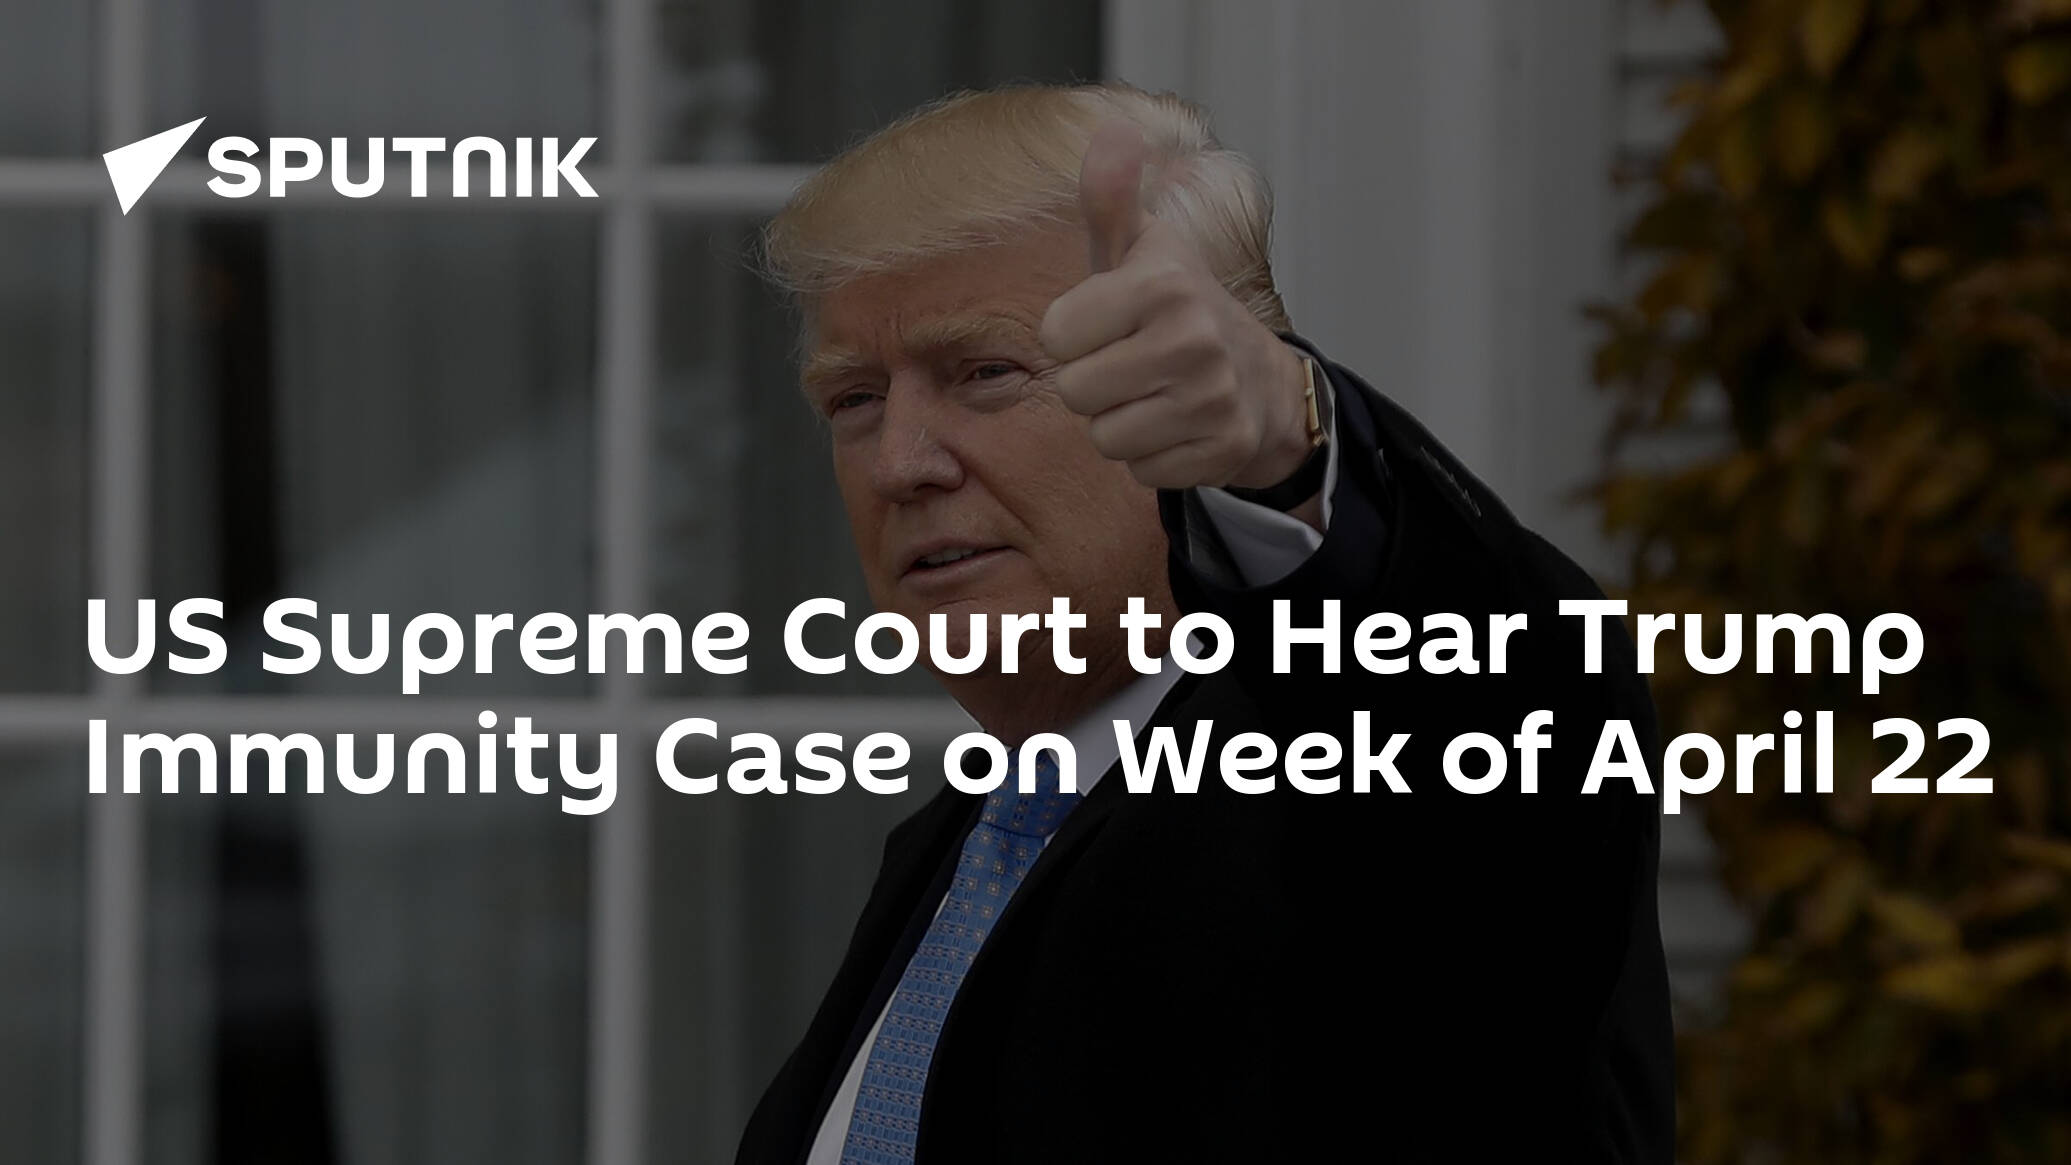 US Supreme Court to Hear Trump Immunity Case on Week of April 22